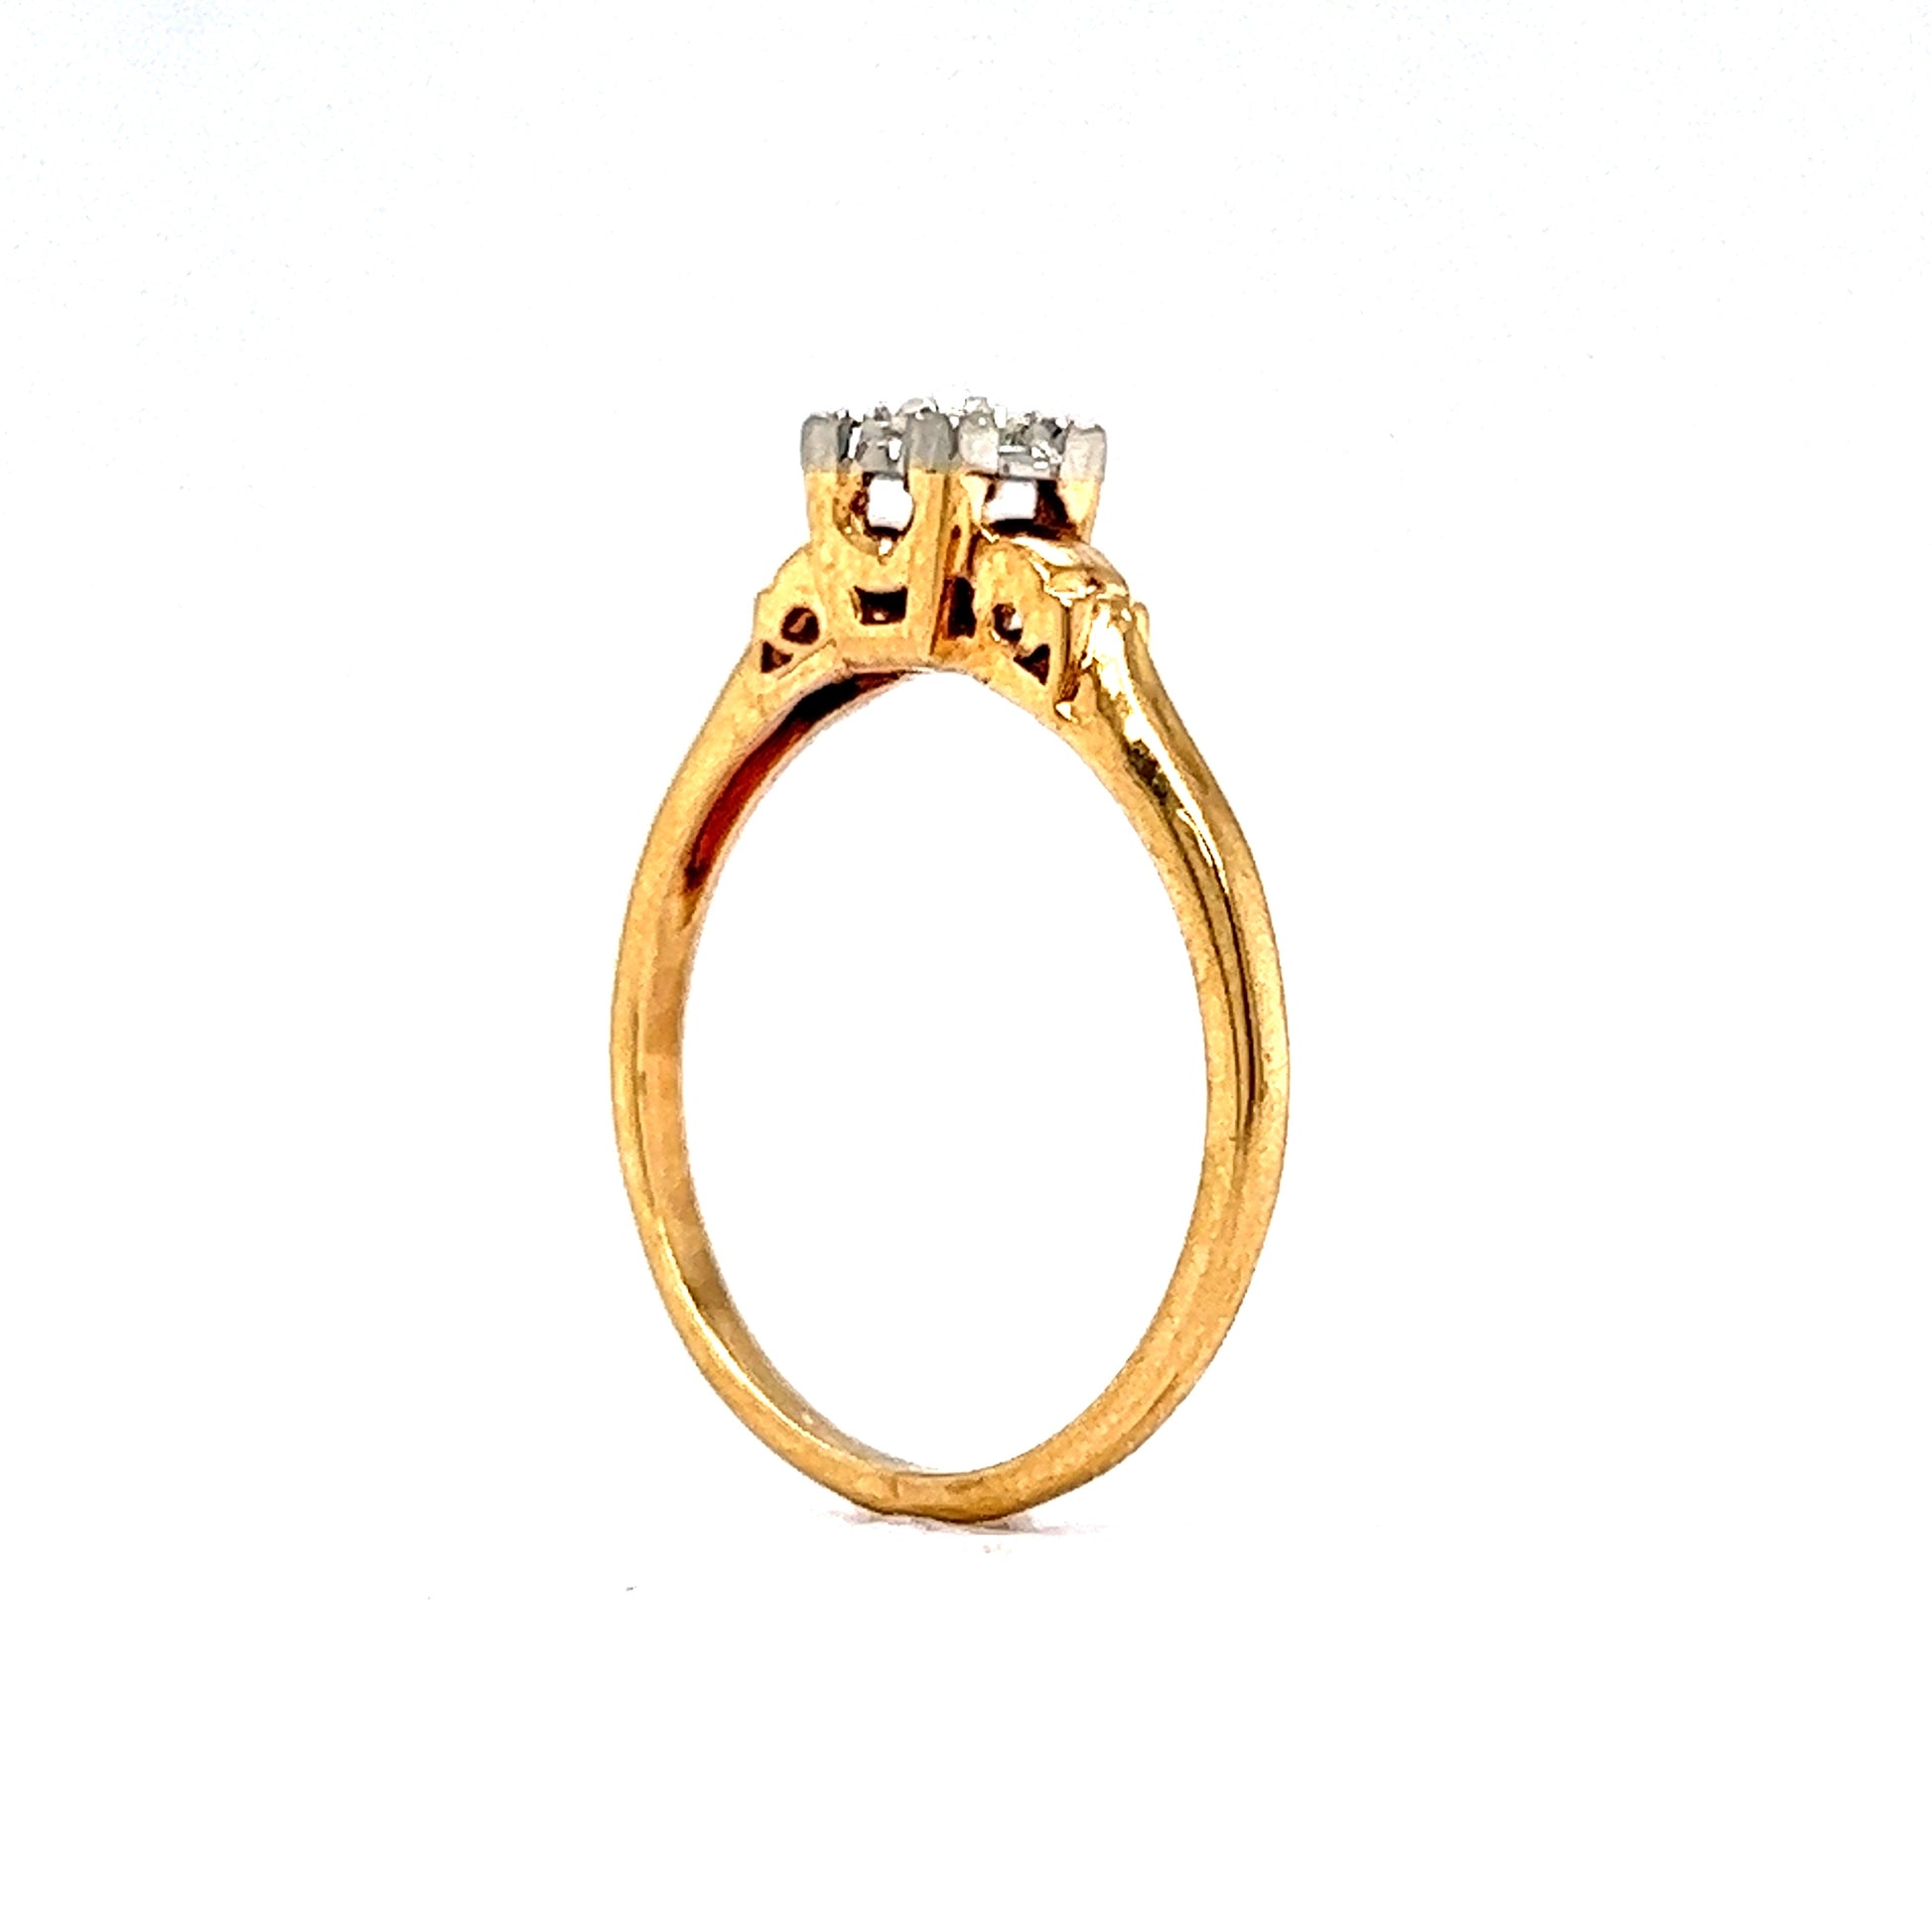 .07 Transitional Solitaire Engagement Ring in 14k Yellow & White GoldComposition: 14 Karat Yellow Gold/14 Karat White Gold Ring Size: 6.25 Total Diamond Weight: .07ct Total Gram Weight: 1.7 g Inscription: 14k
      